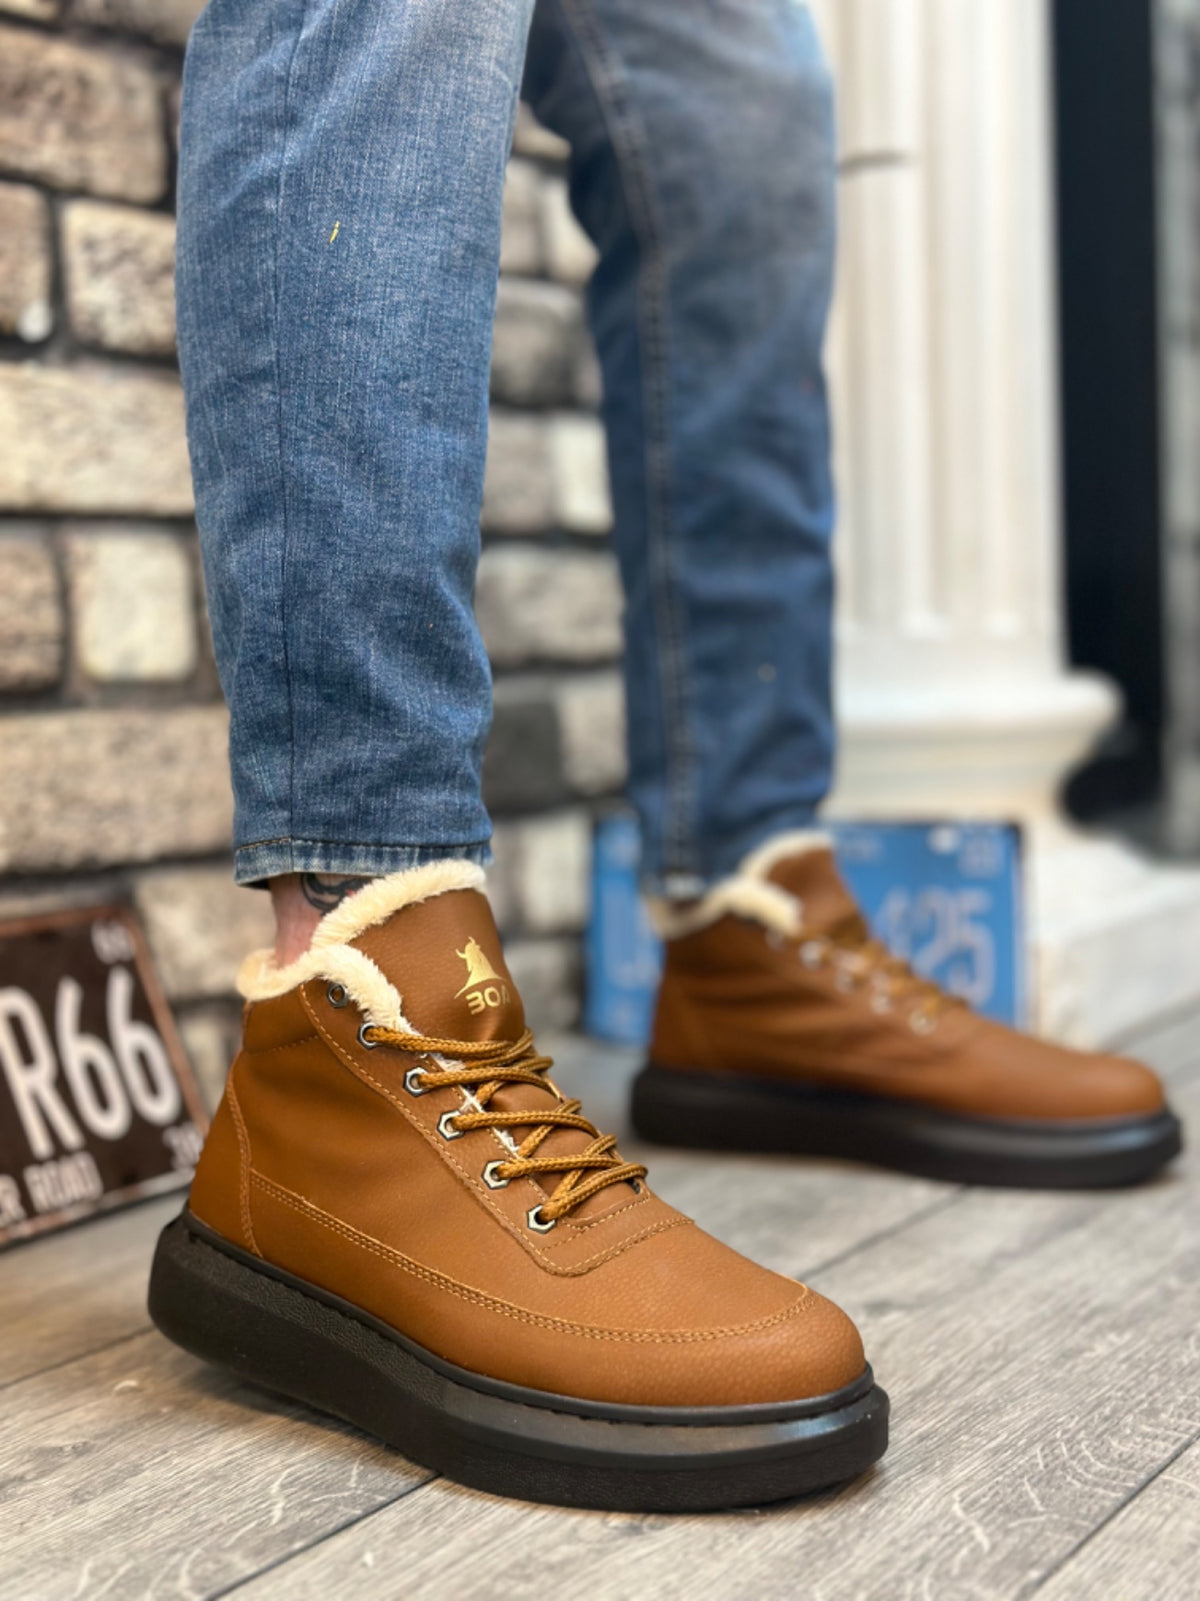 BA0151 Light Brown Men's Style Sports Boots with Fur Inside and Laces - STREETMODE™